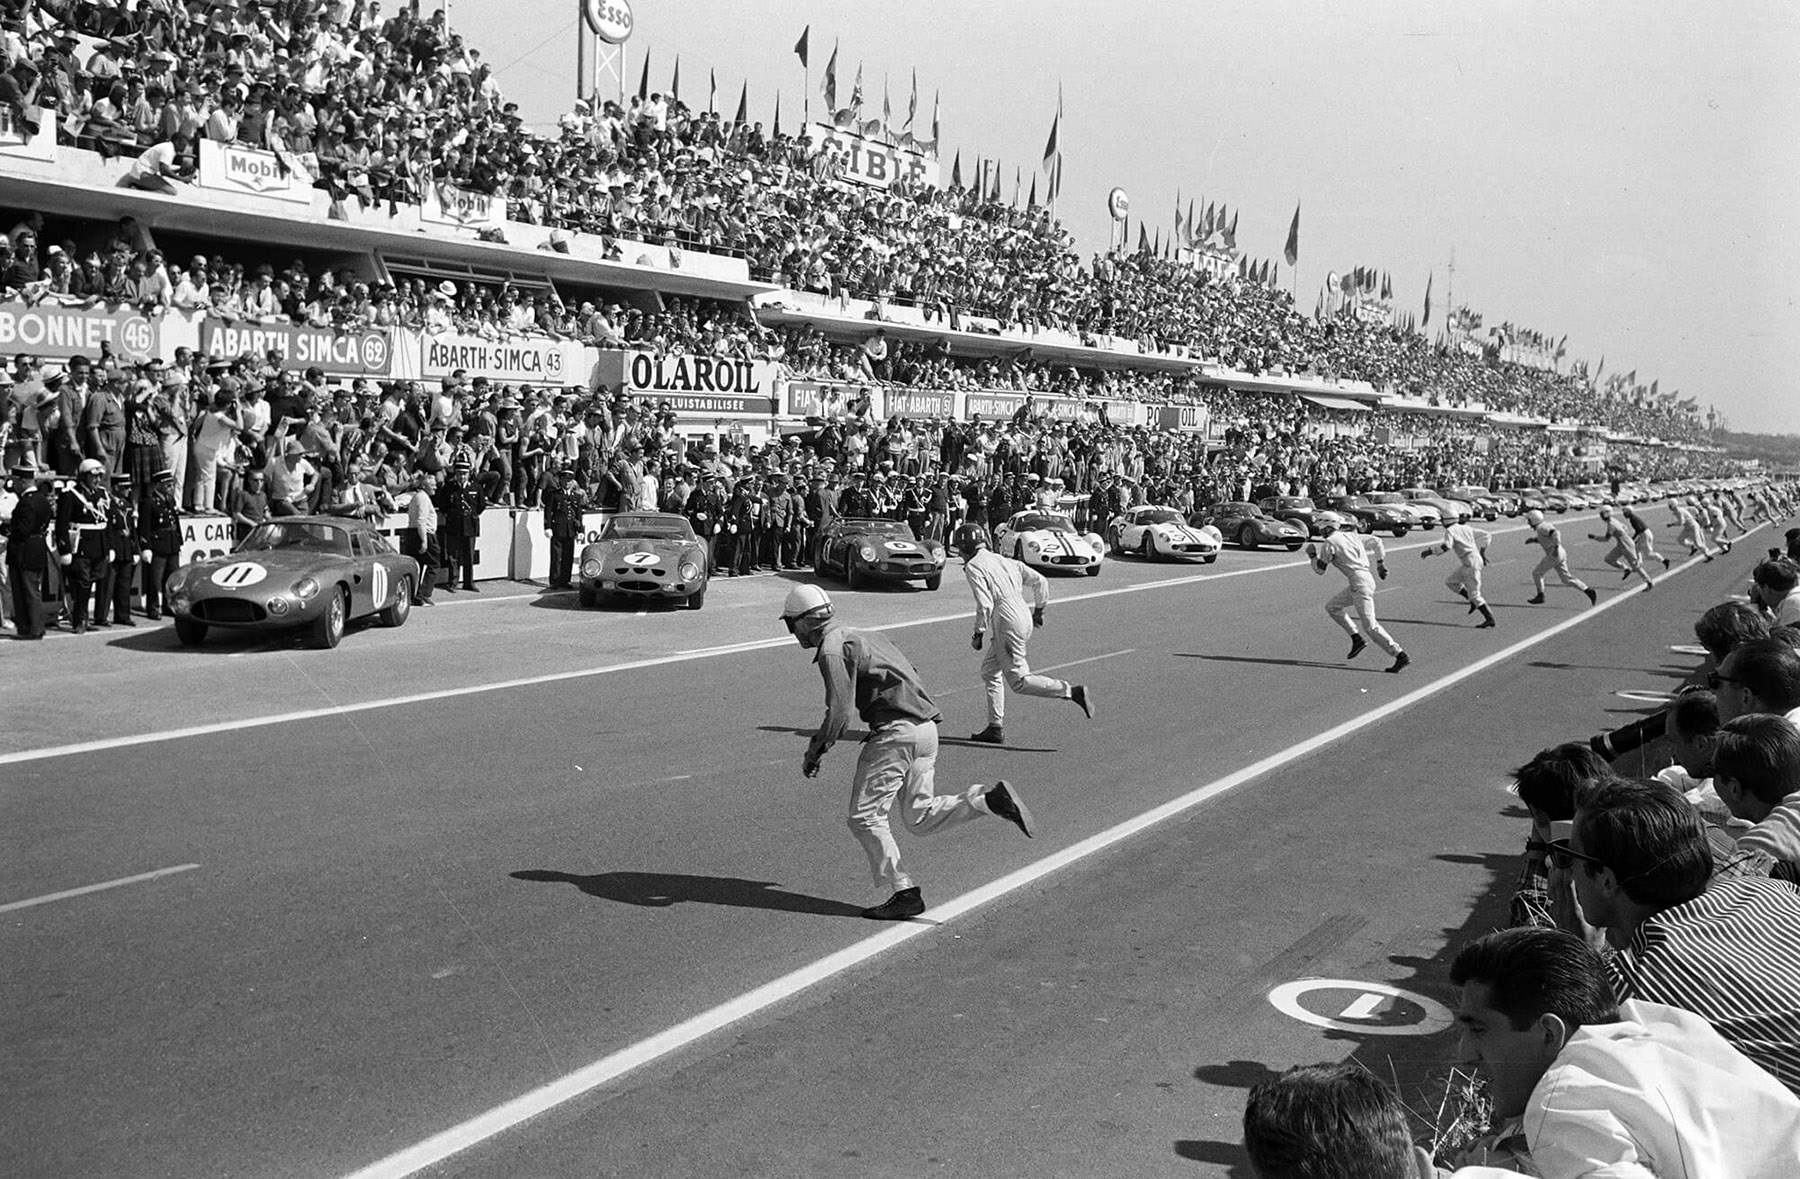 Drivers run to their cars at the start of the race during the 24 Hours of Le Mans at Circuit de la Sarthe on 24 June 1962. Chassis no. 3765 is the second car in from the left, #7.